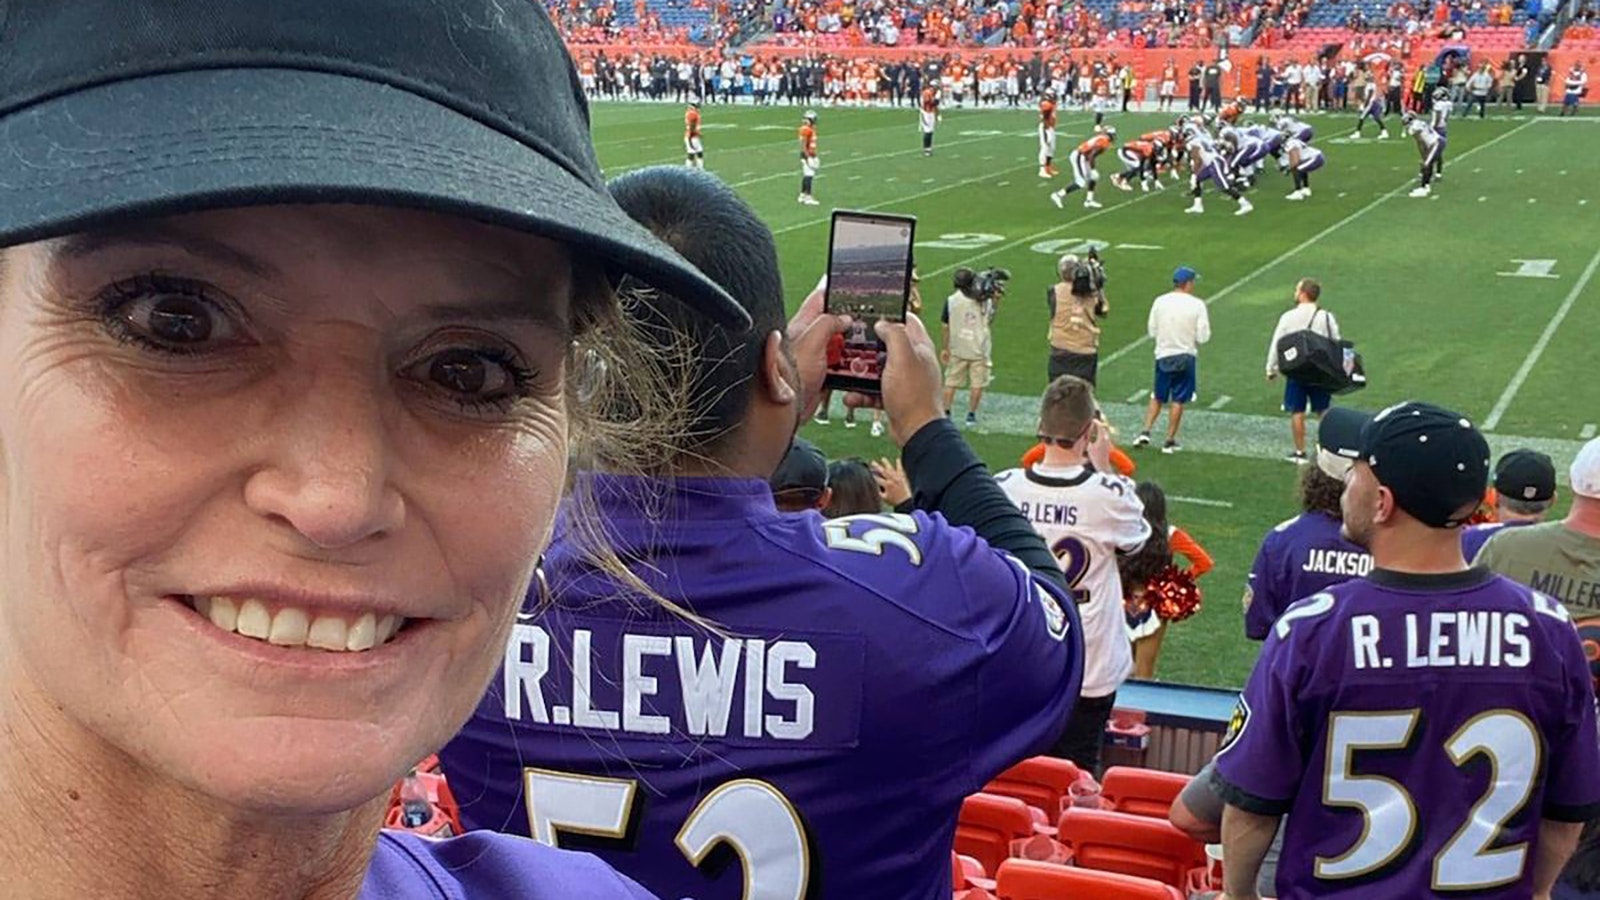 Mary Axthelm of Riverton was honored in October 2021 when the Baltimore Ravens played the Denver Broncos. Her seats were eight rows behind the Ravens sideline.